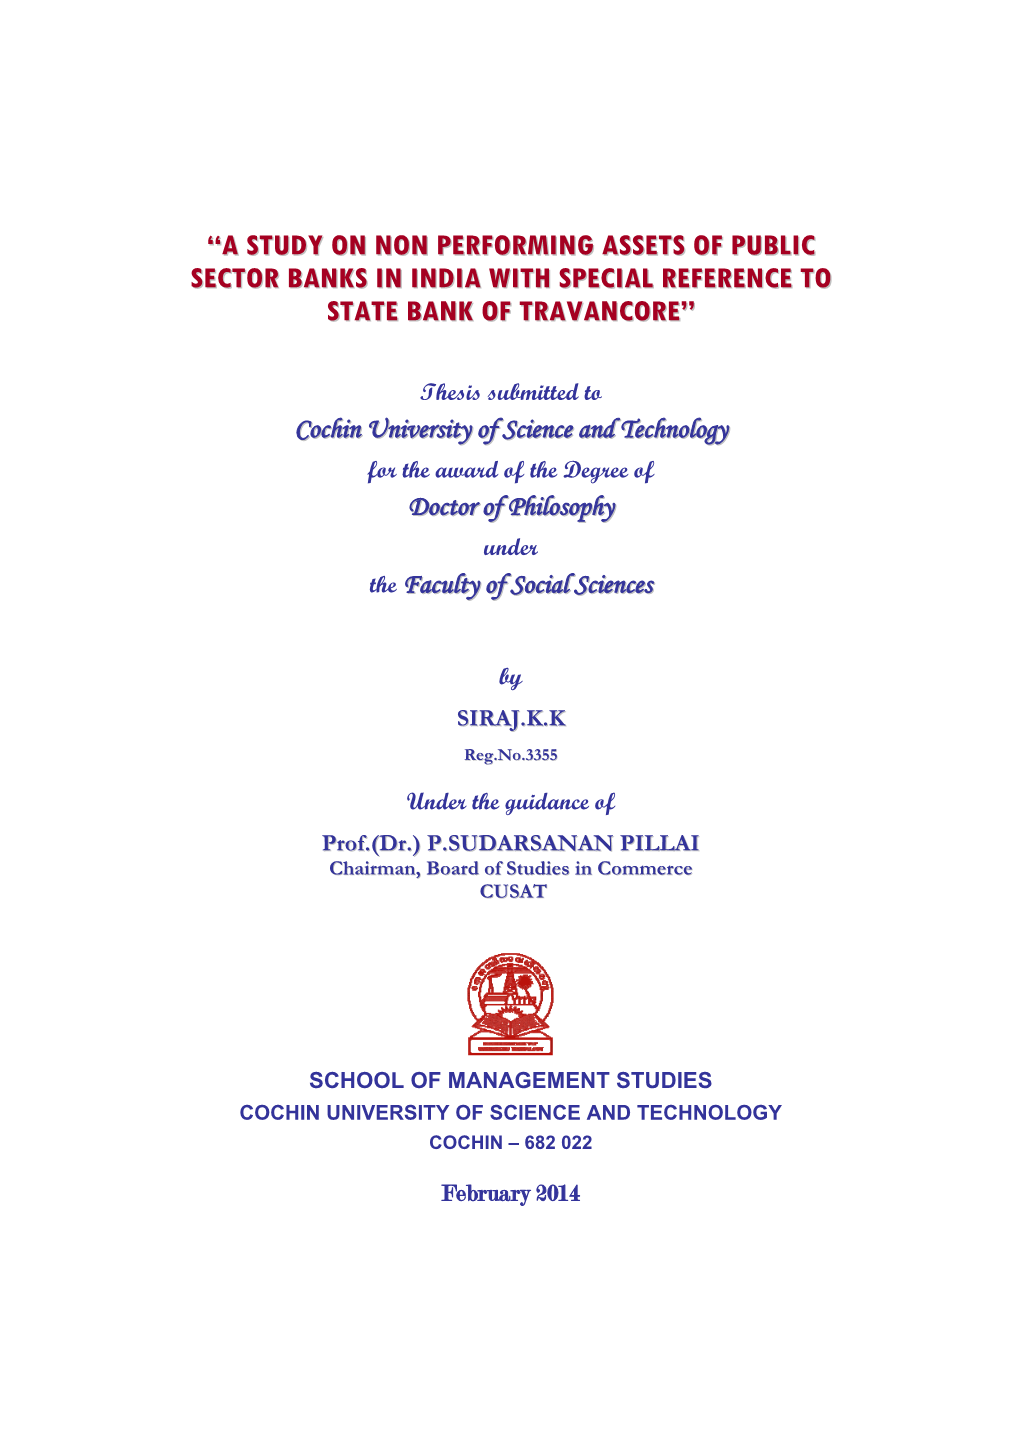 A Study on Non Performing Assets of Public Sector Banks in India with Special Reference to State Bank of Travancore”